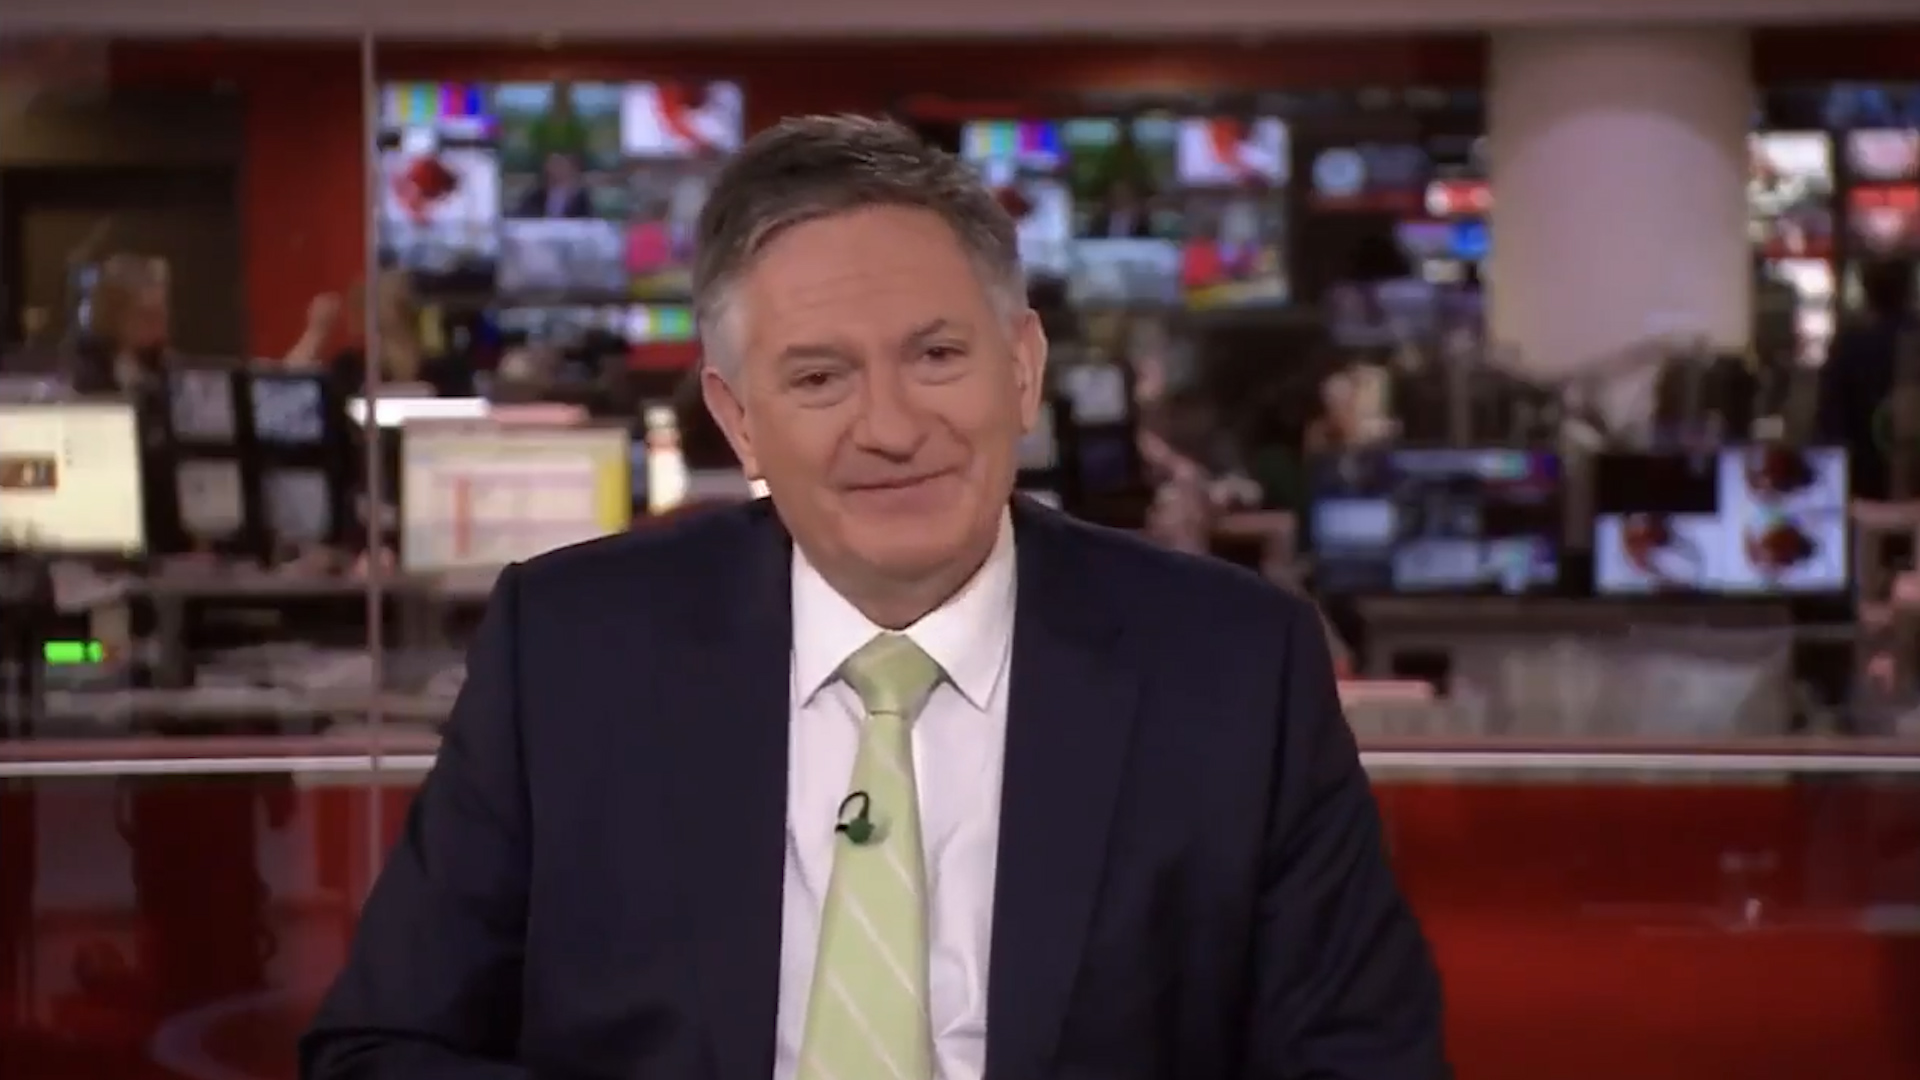 BBC newsreader, Simon McCoy laughs during live news broadcast about a ...